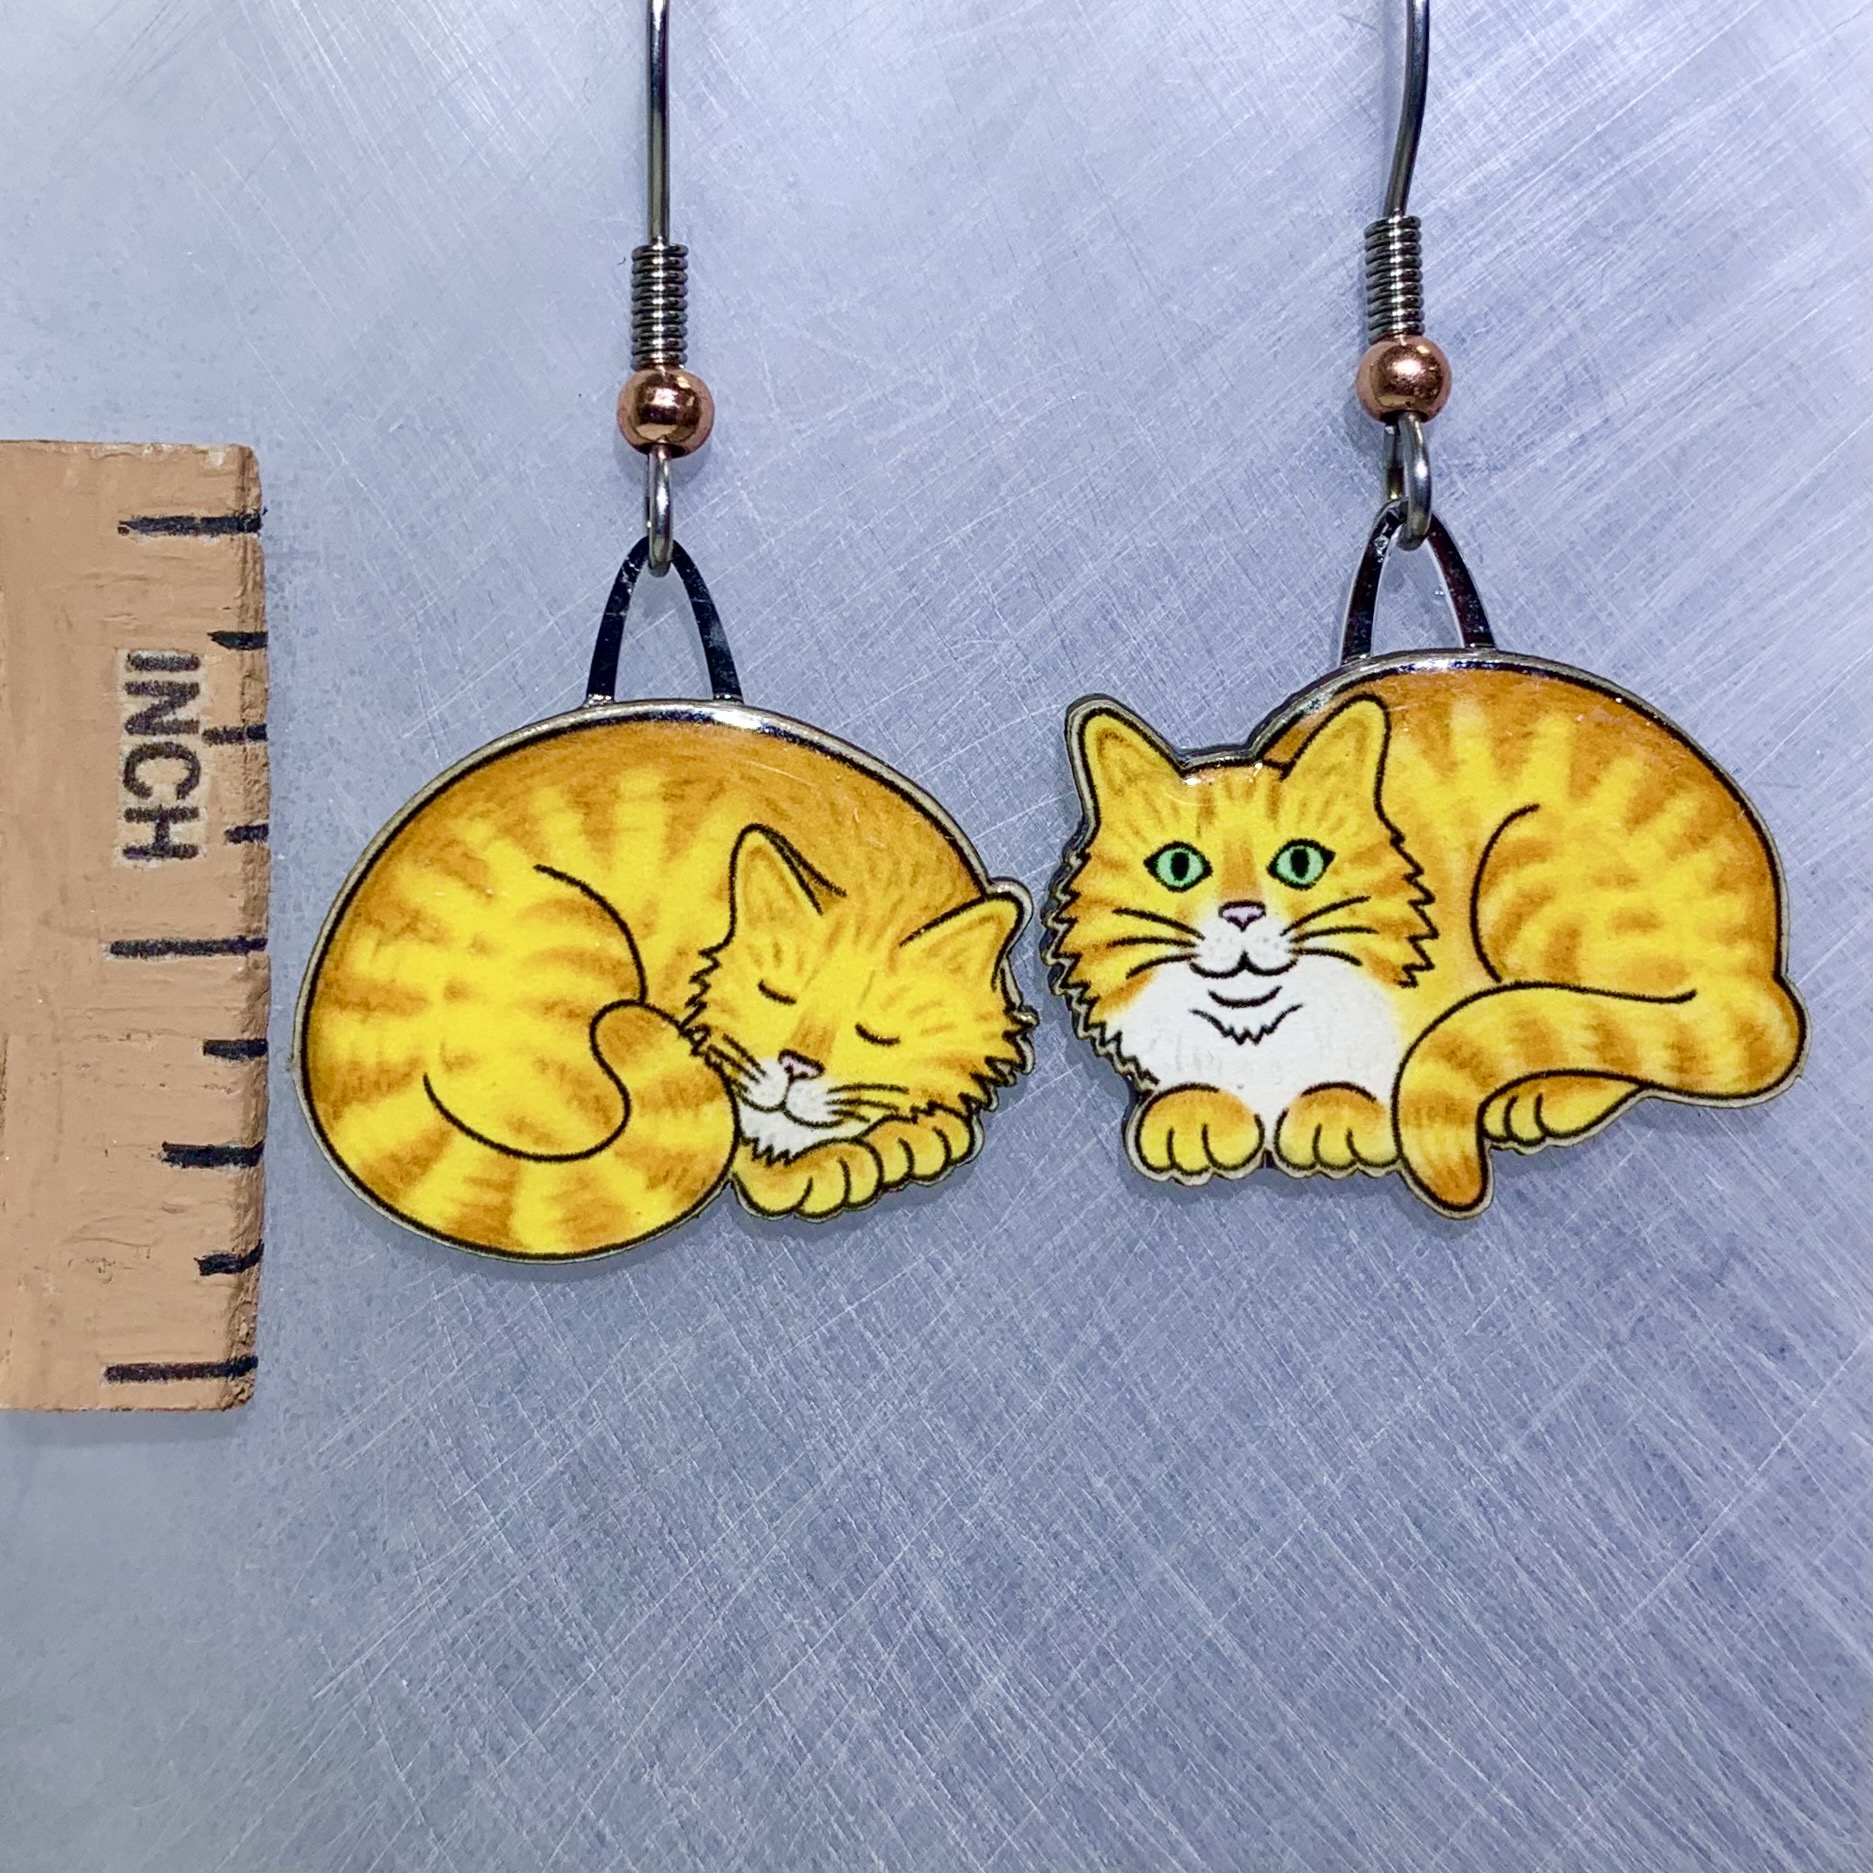 Picture shown is of 1 inch tall pair of earrings of the pet the Yellow Napping Cat.